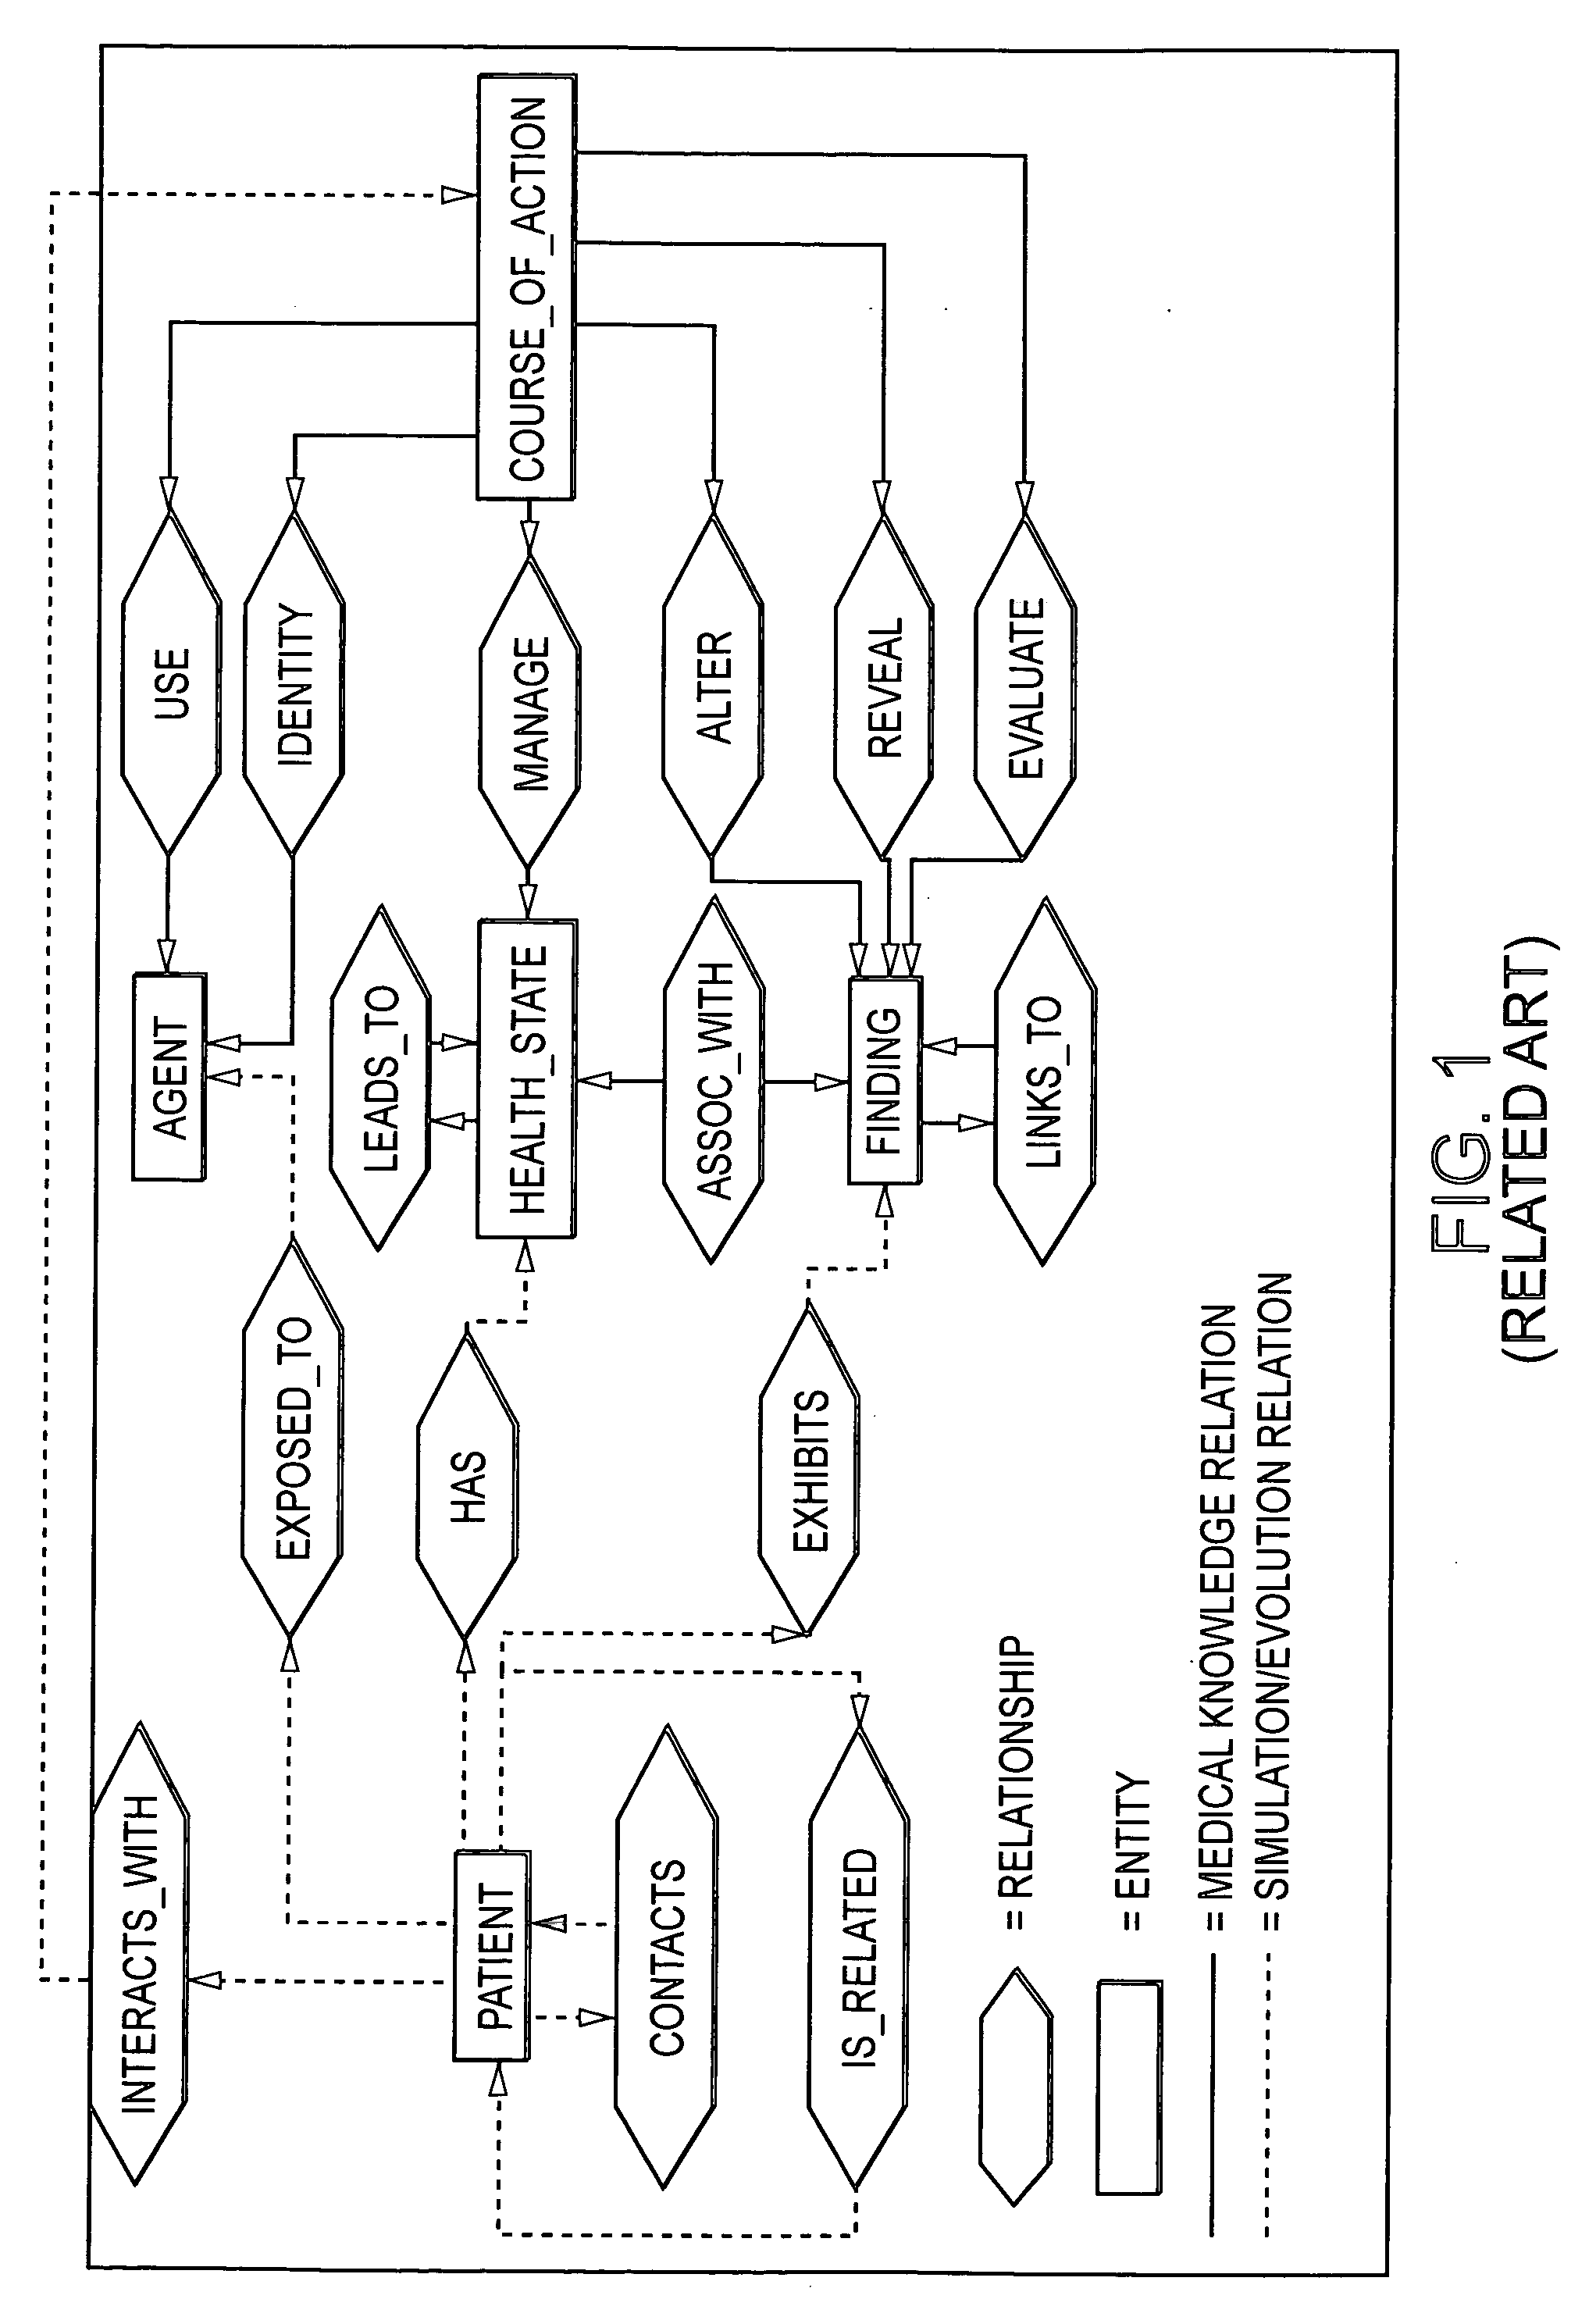 Computer architecture and process of patient generation, evolution, and simulation for computer based testing system using bayesian networks as a scripting language